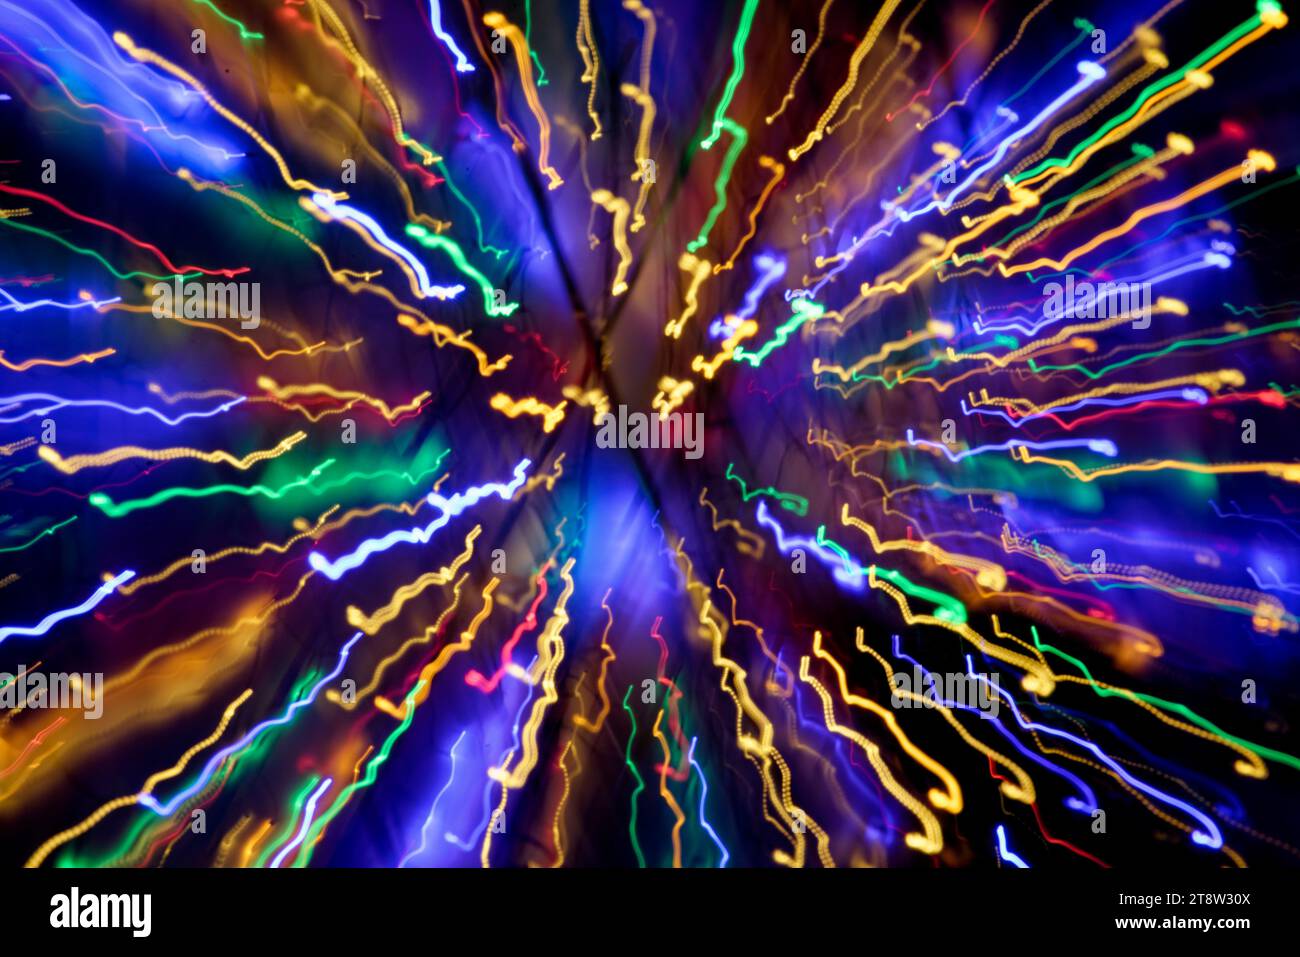 Blurred multi coloured light patterns streaks against a dark background creating abstract shapes Stock Photo